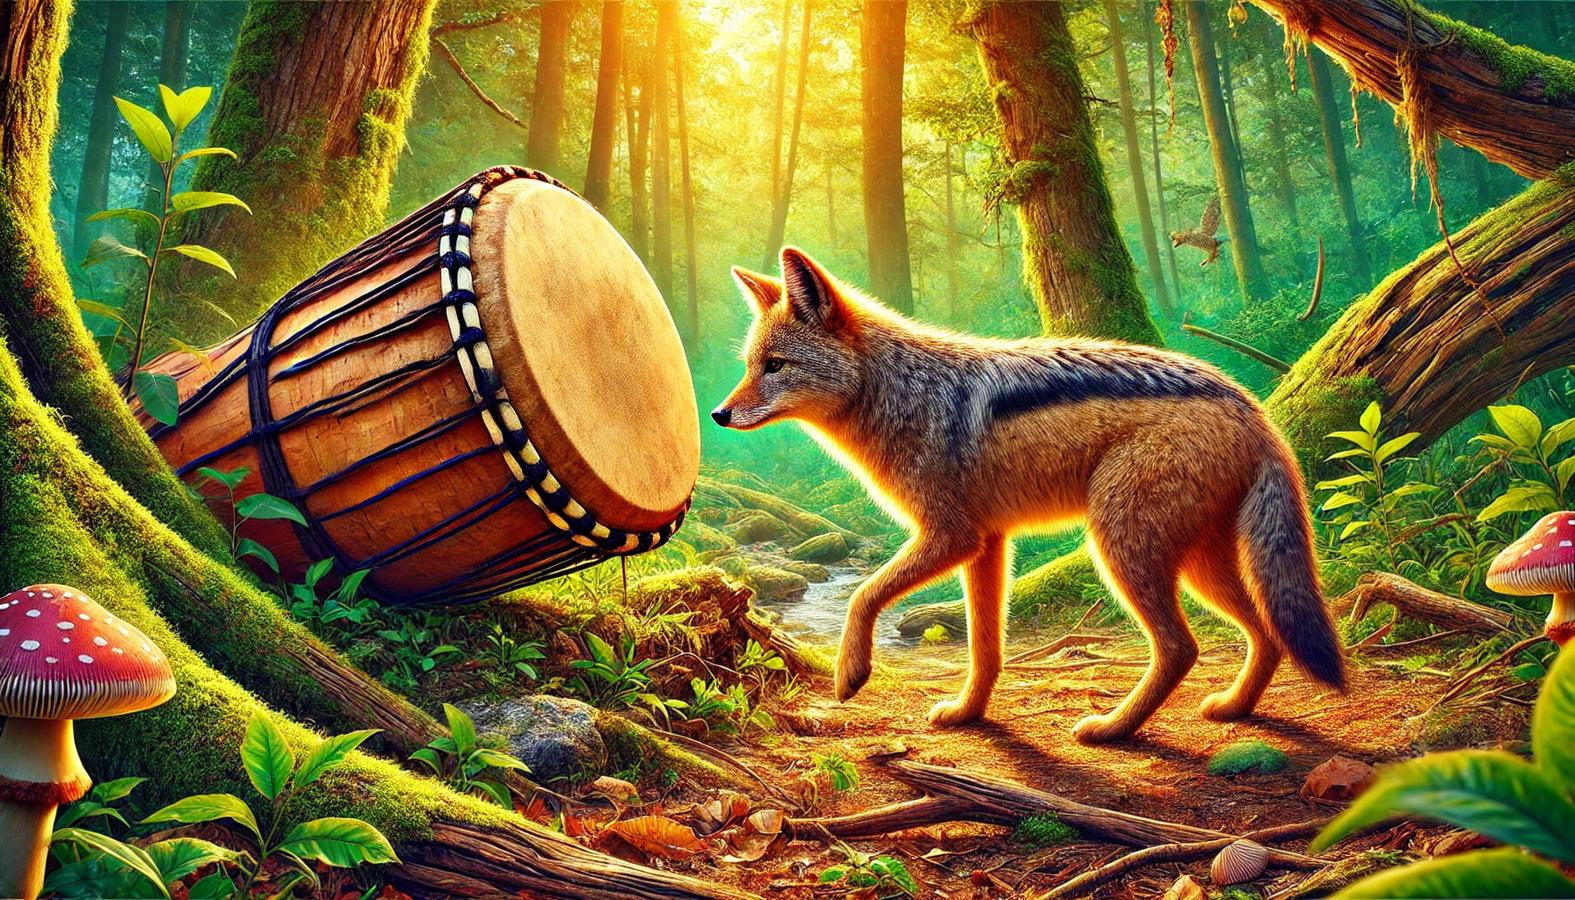 Jackal approaching a drum in a forest clearing with curiosity.